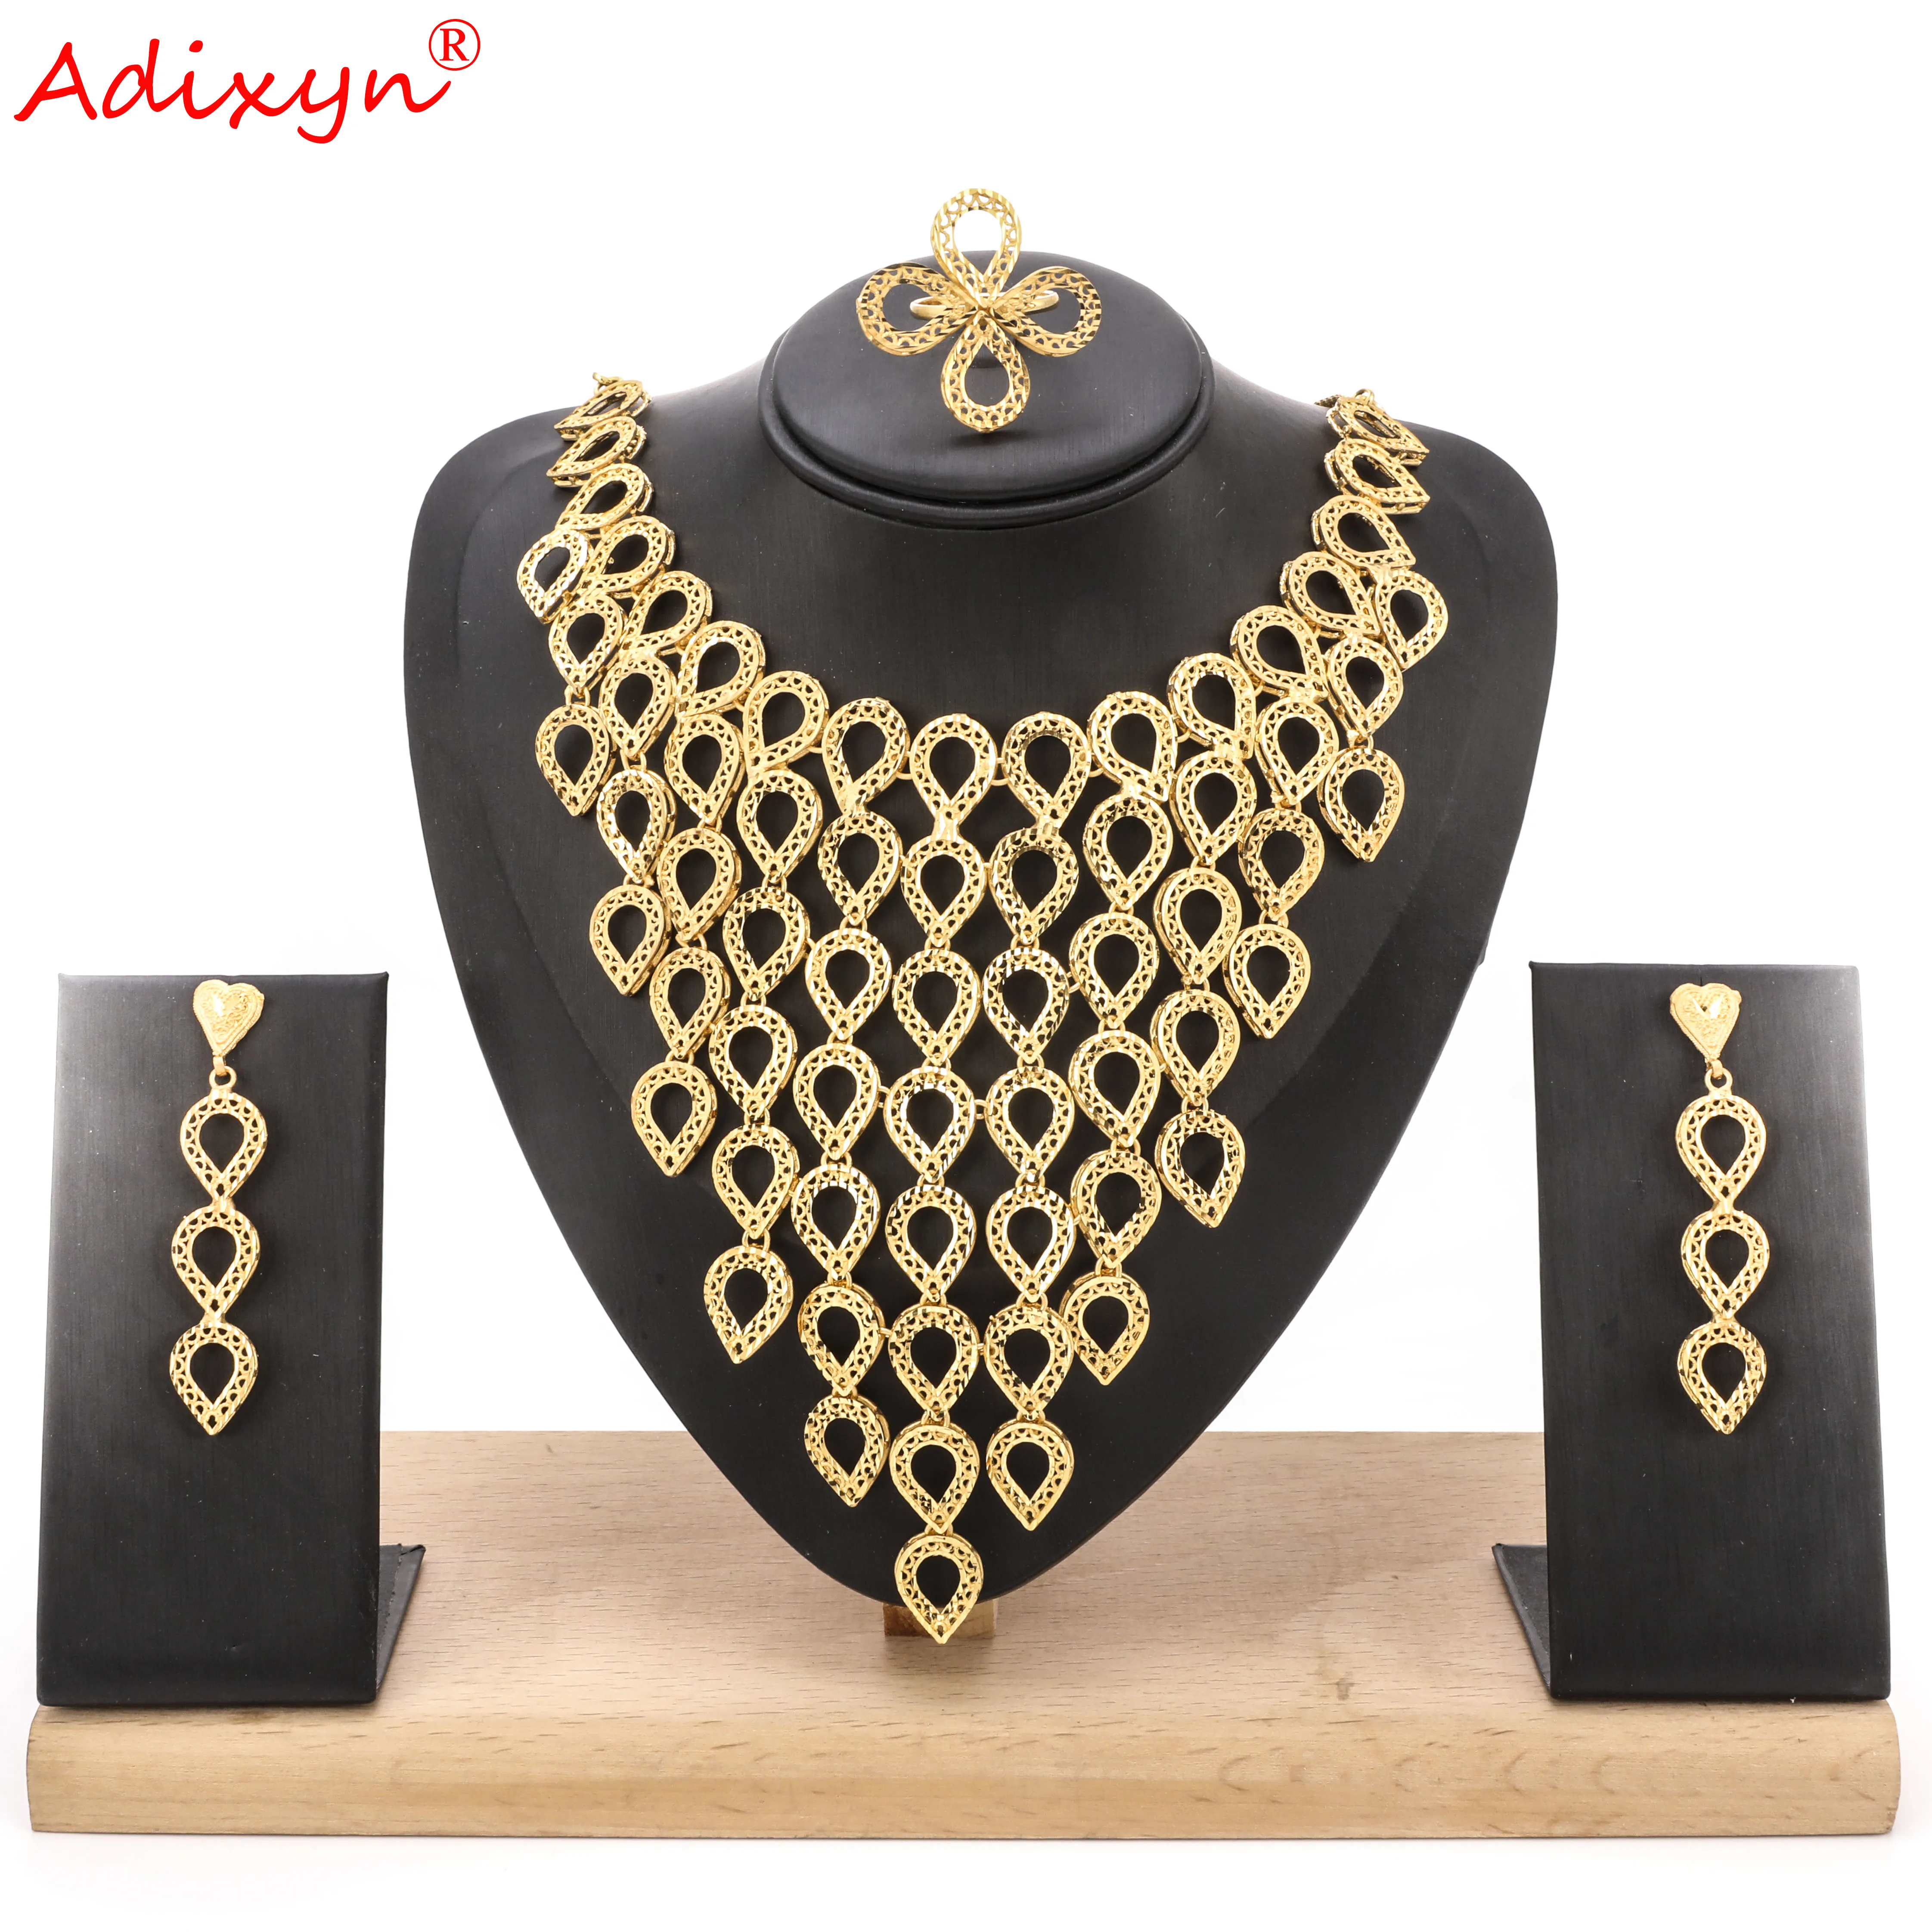 

Adixyn Luxury Dubai Jewelry sets for Women 24K Gold Color Necklace Earrings Ring Indian Nigeria African Bridal Wedding Gifts